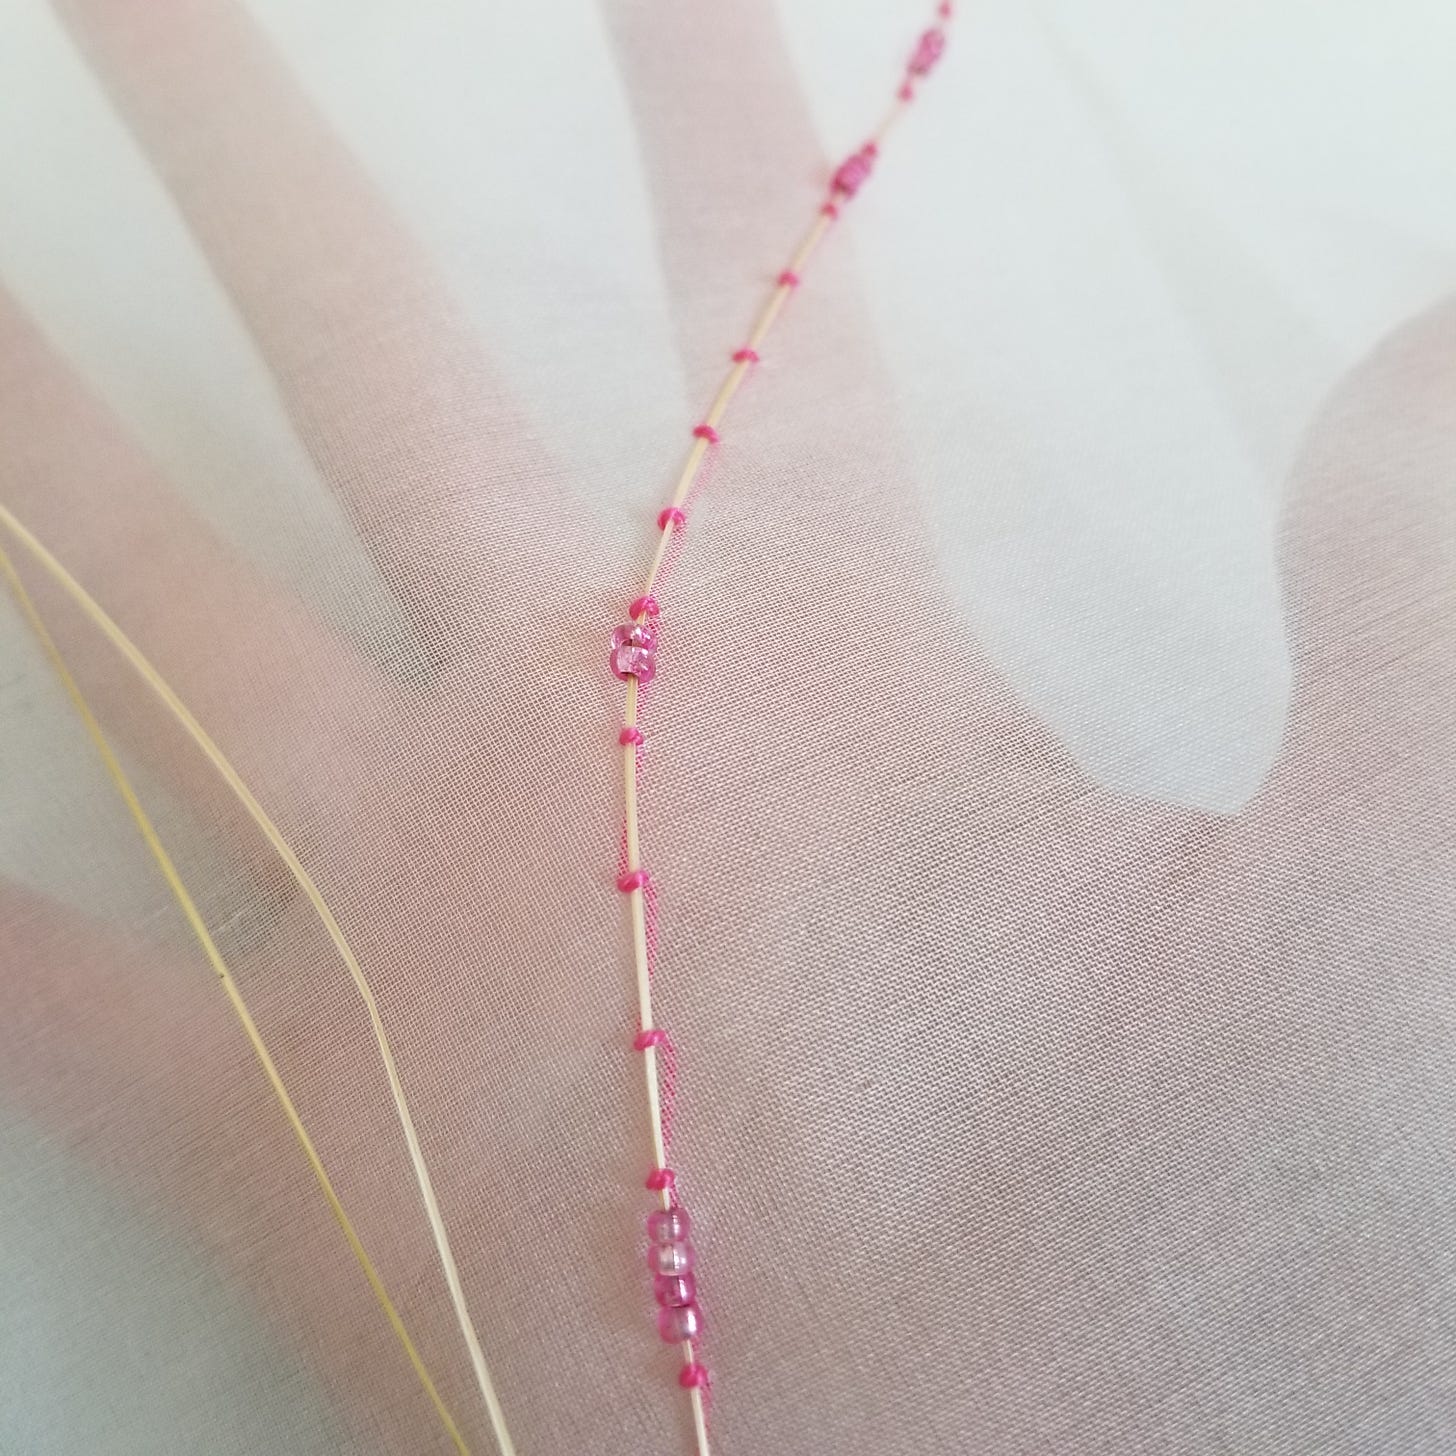 Dried grass couched to silk organza with pink thread and pink glass beads